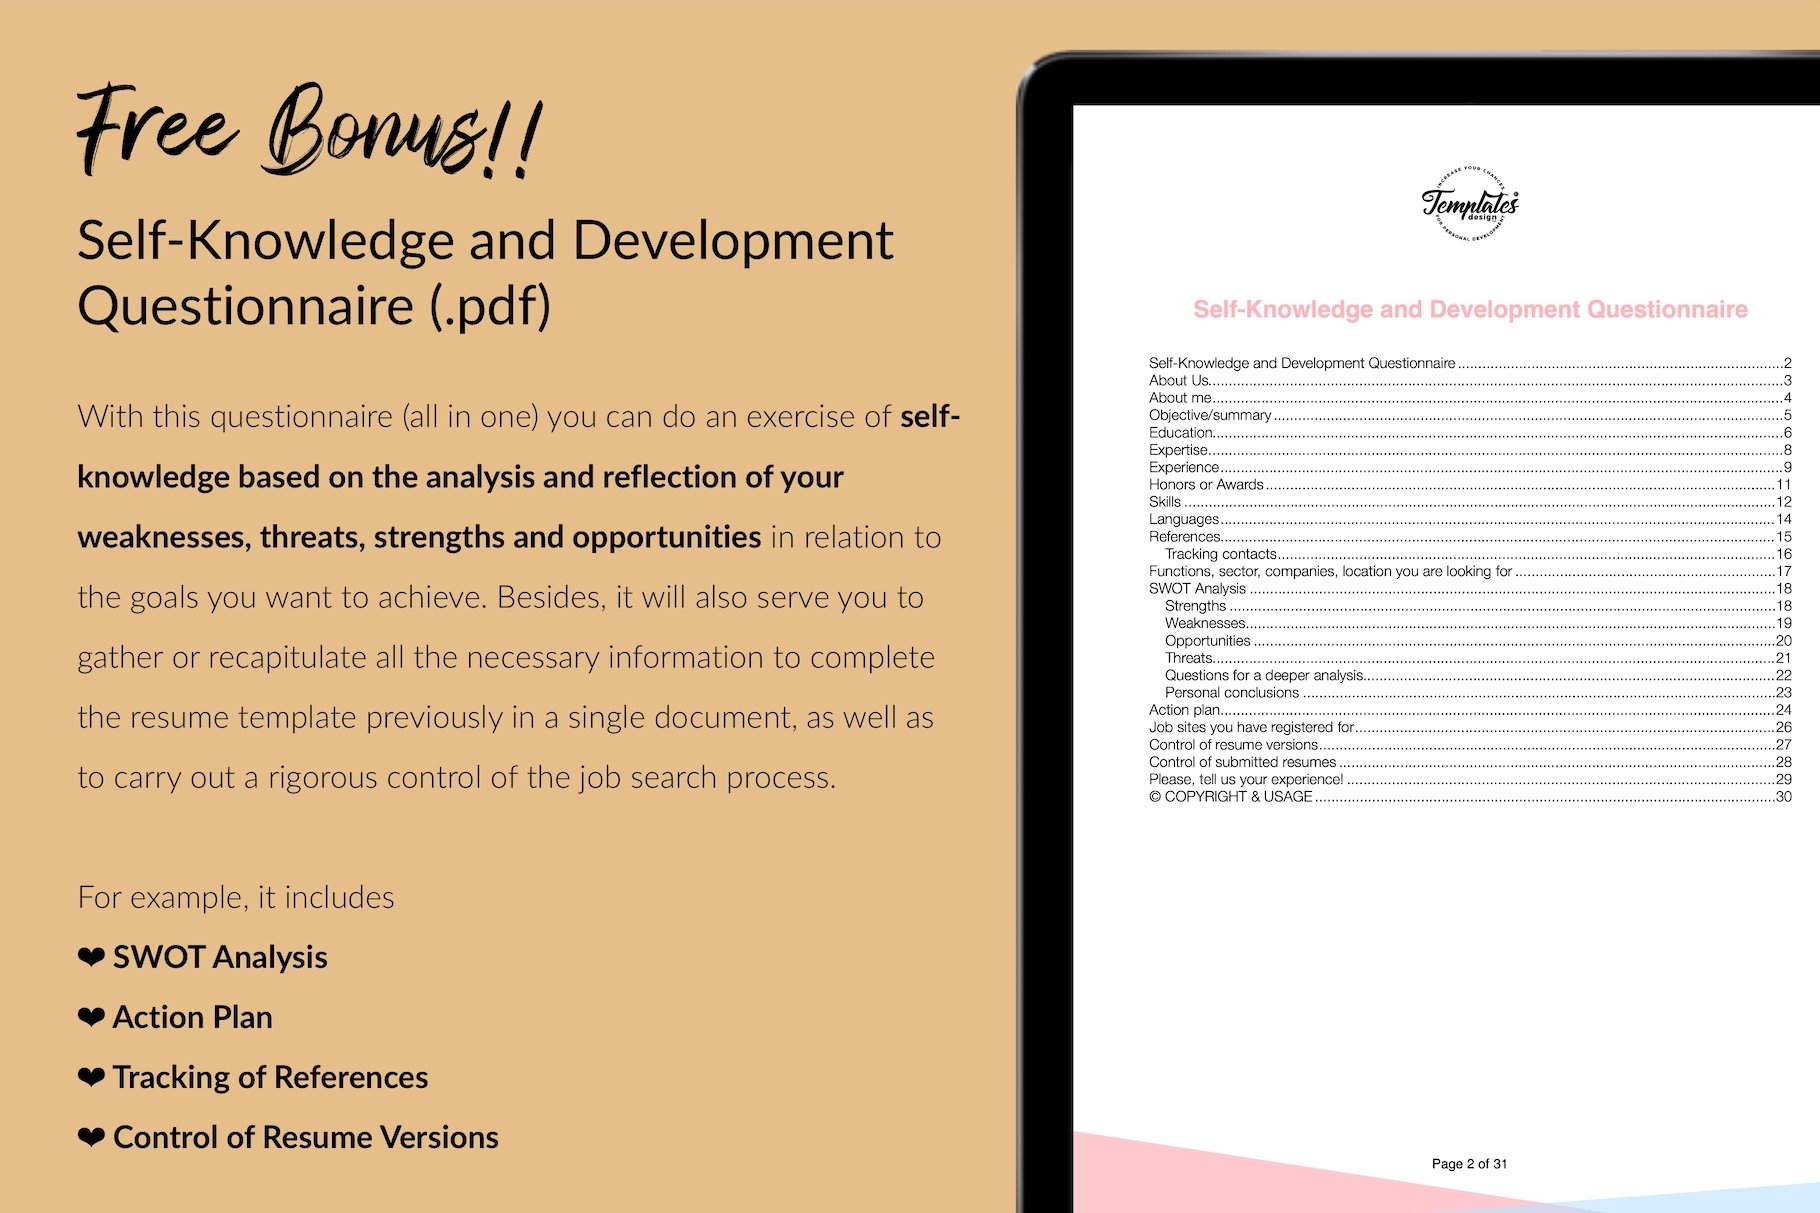 resume cv template audrey stewart for creative market 12 self knowledge and development questionnaire 657